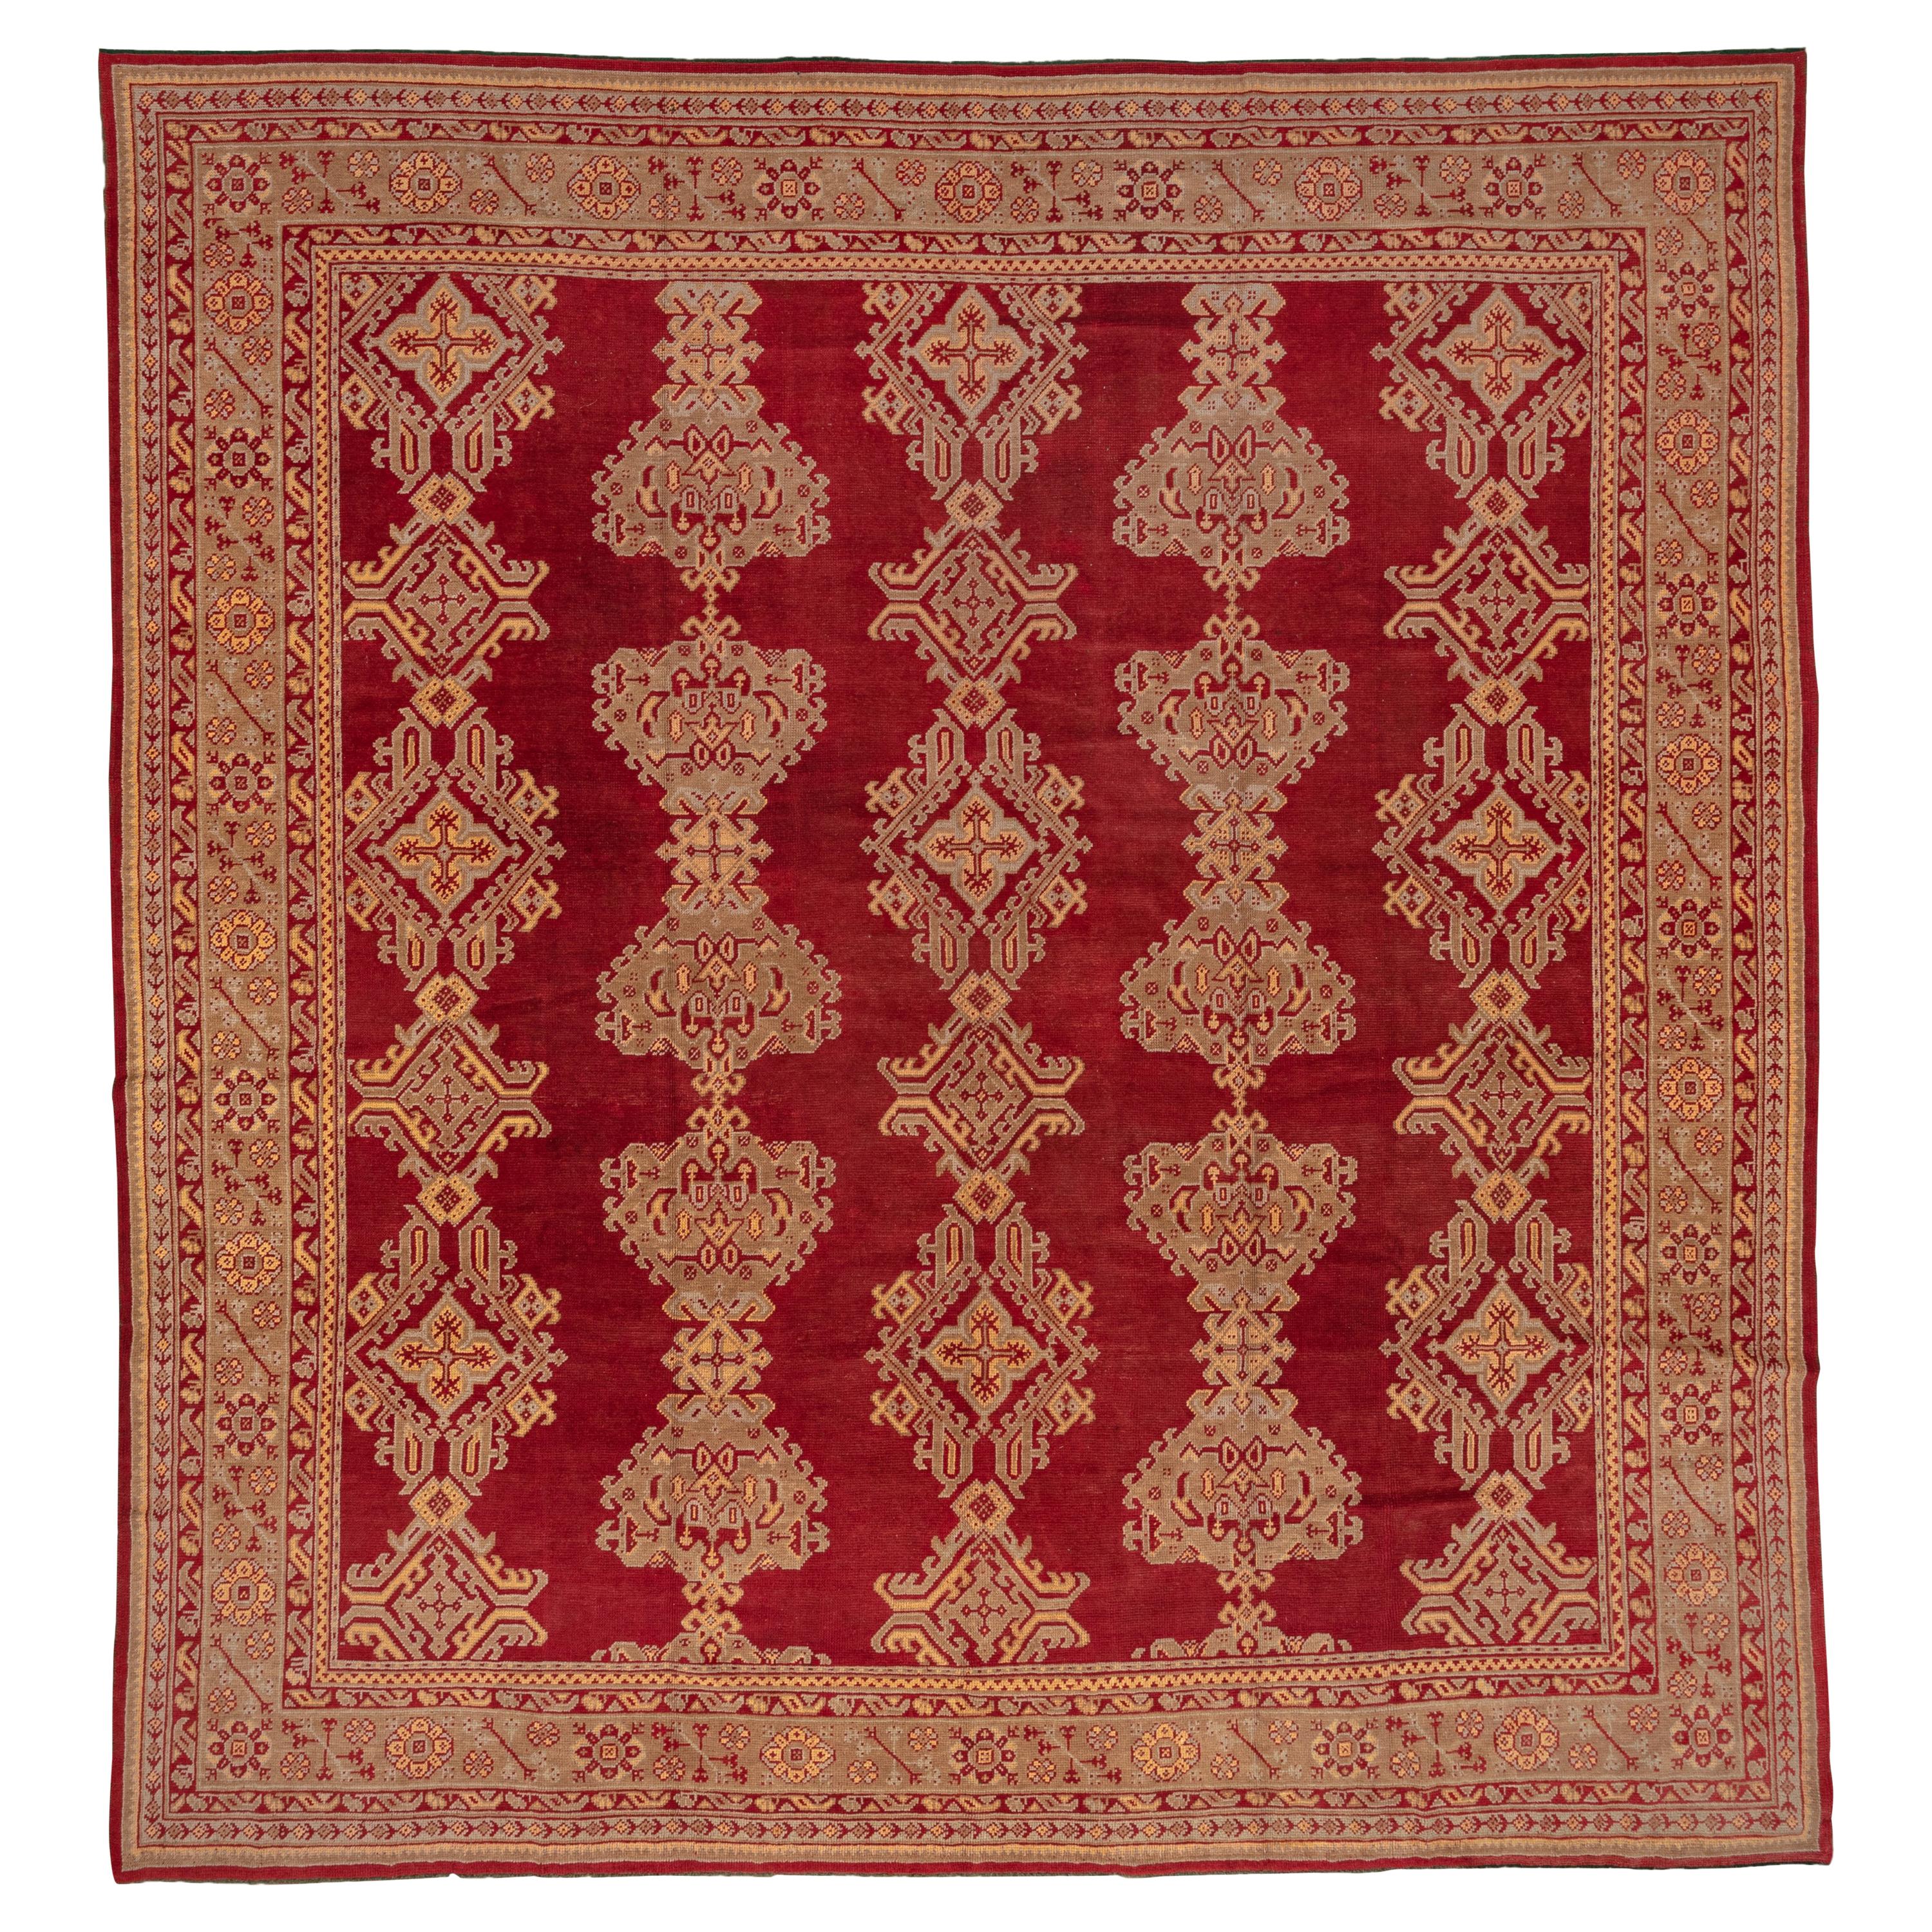 Antique Turkish Oushak Square Wool Rug, Red Allover Field, Circa 1920s For Sale